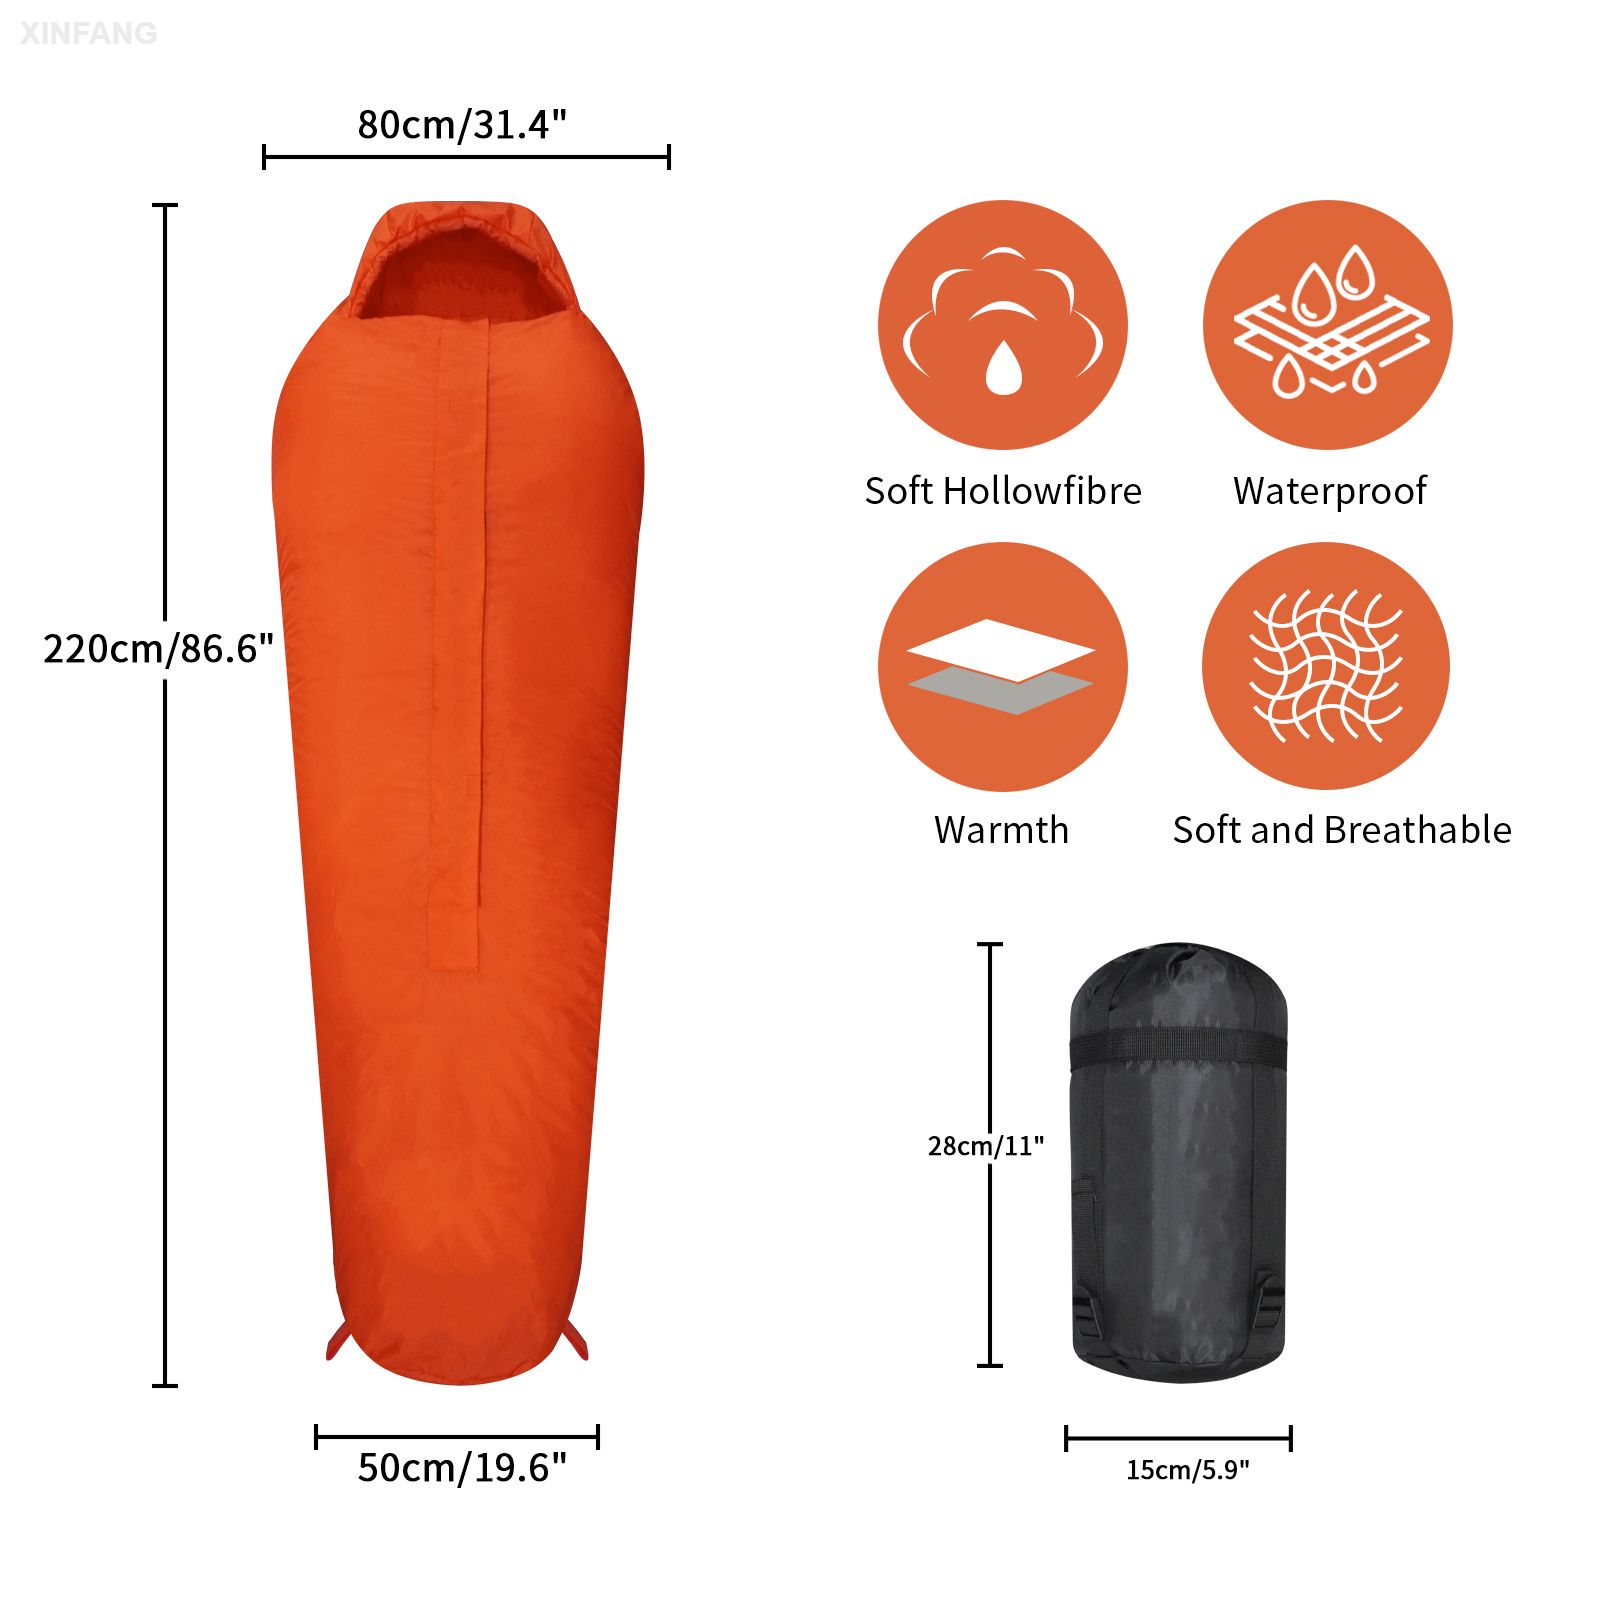 Camping Sleeping Bag for Warm Weather Seasons with Compression Sack - Protable,Lightweight and Waterproof Sleeping bag for Camping,Hiking and Backpacking